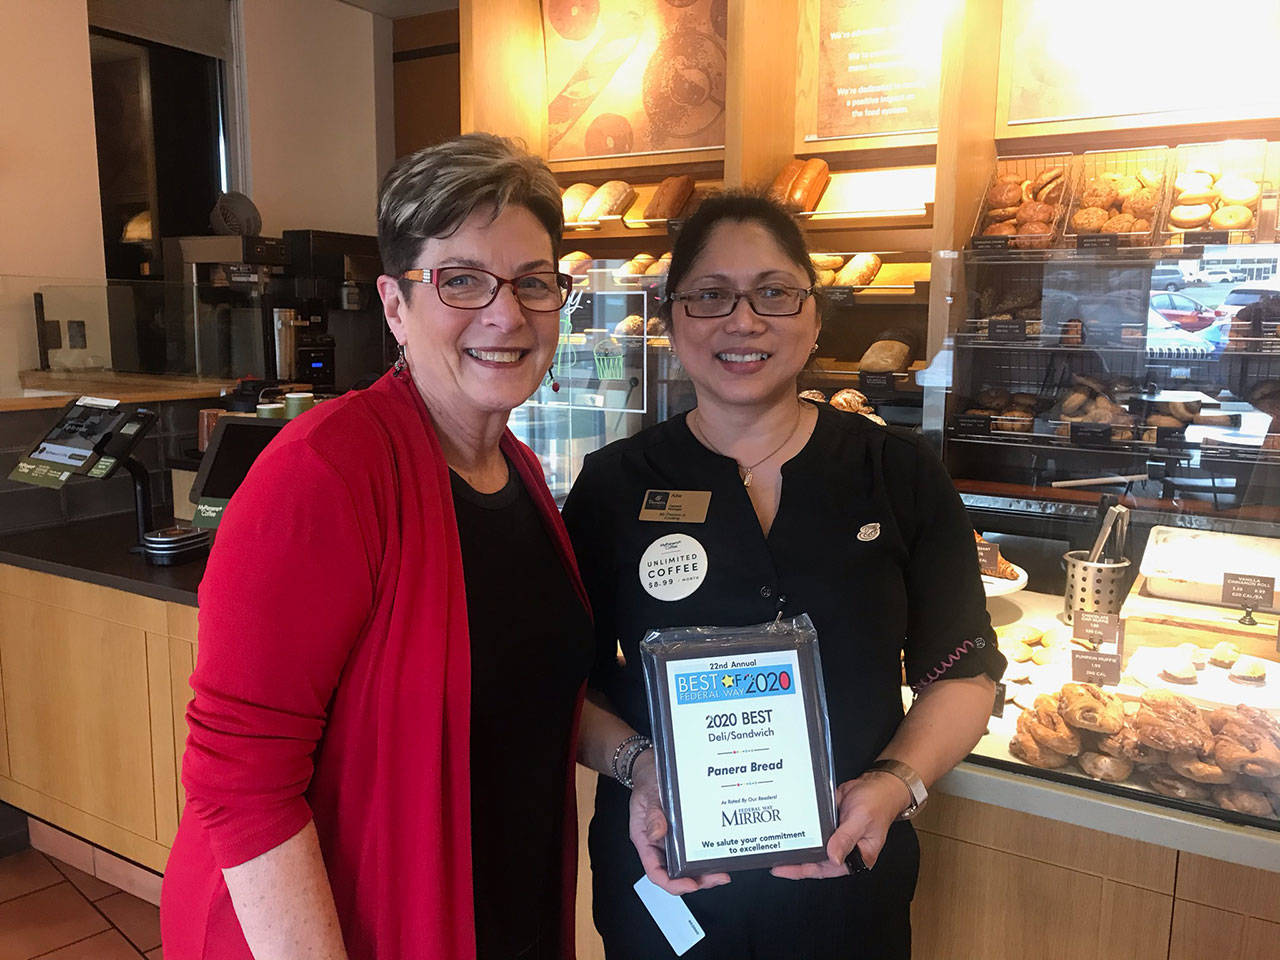 Panera Bread won first place for Best Deli/Sandwich. Courtesy photo